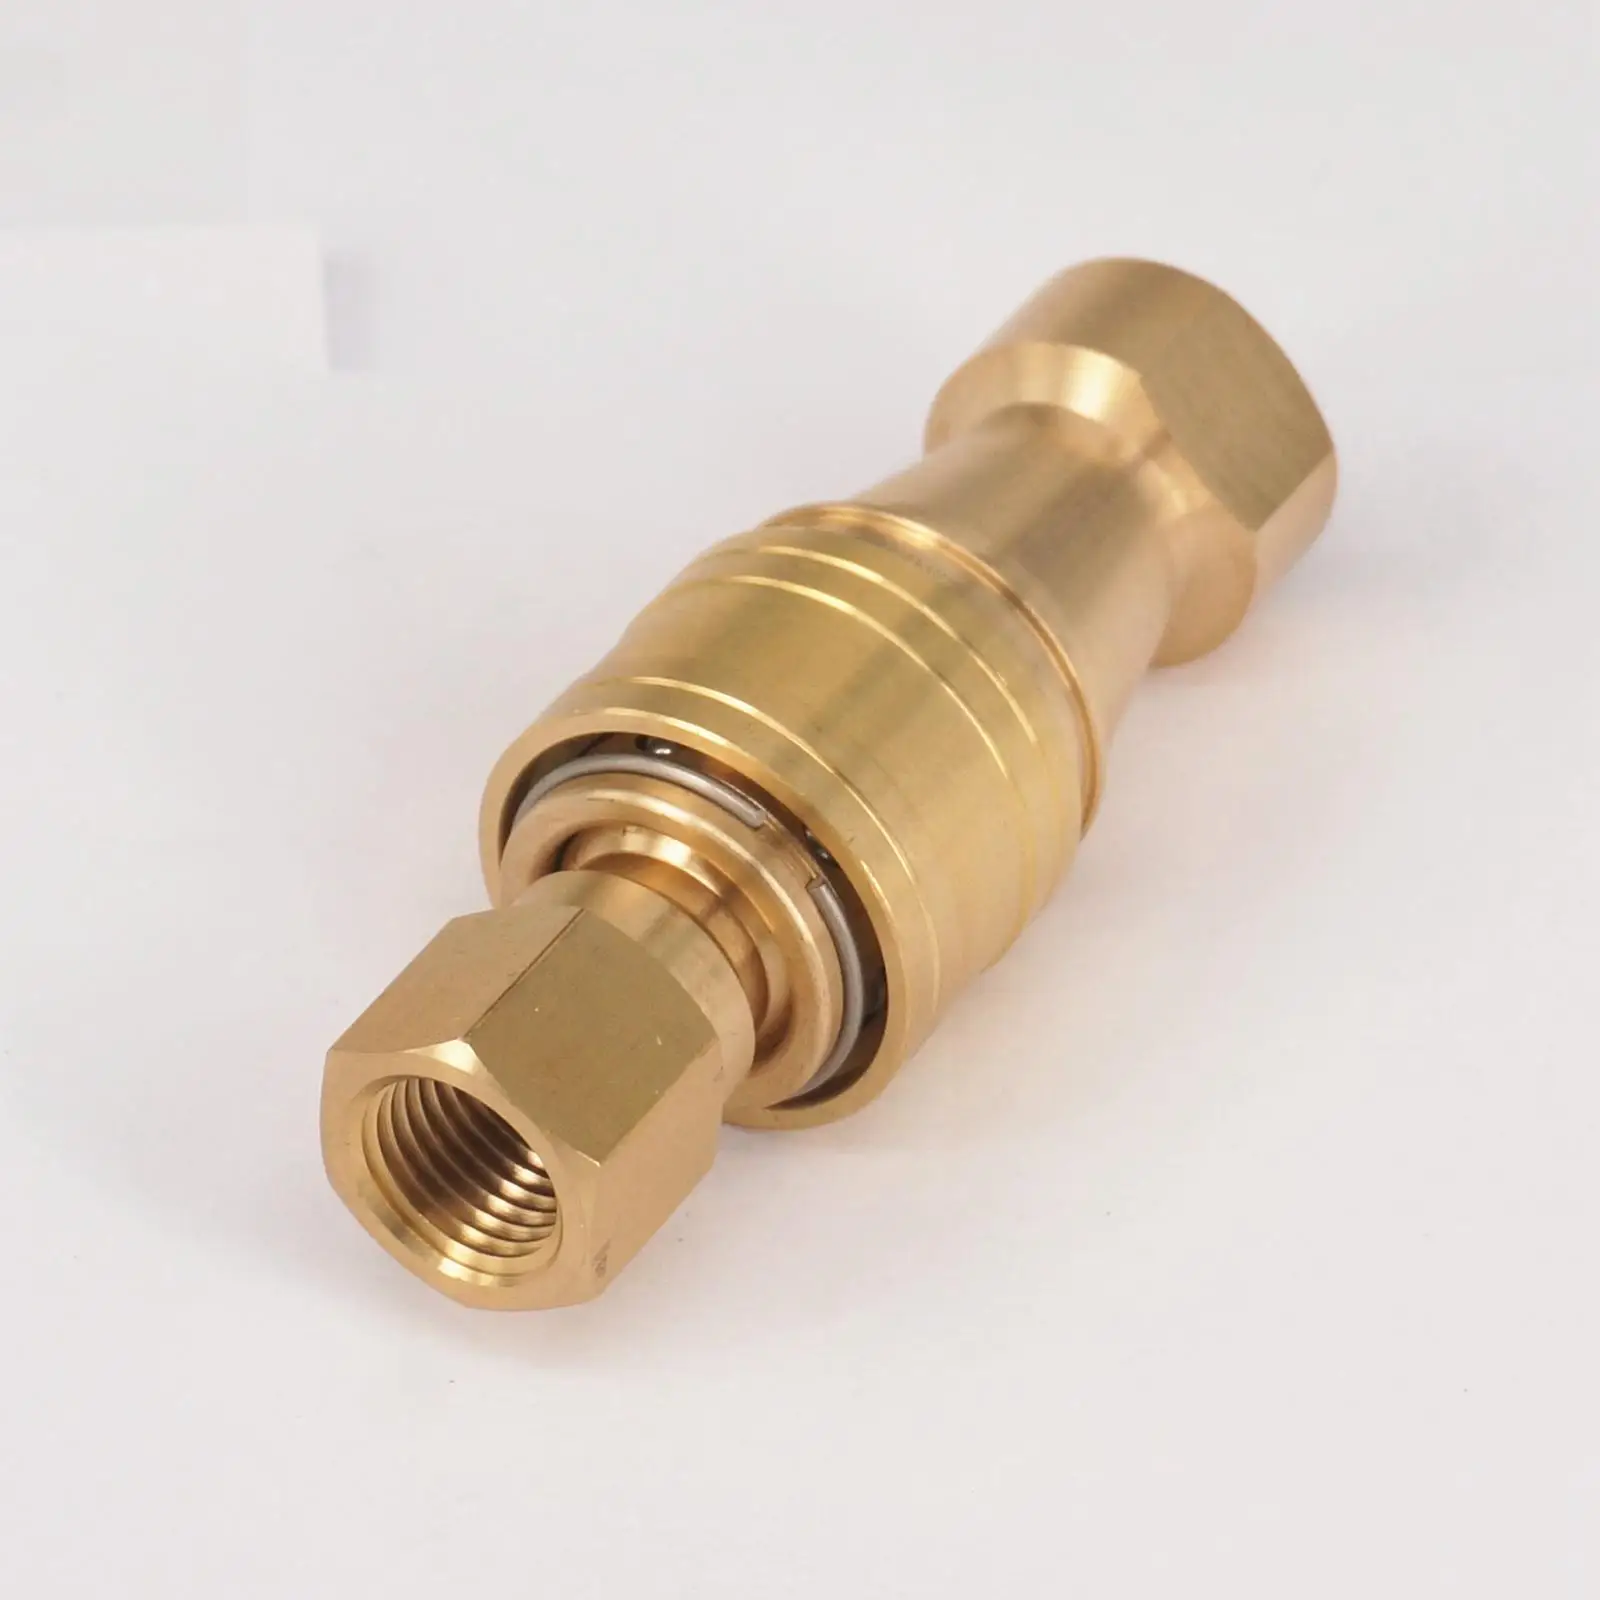 Carpet Cleaning 1/8" Brass Plug & Socket Quick Disconnect 